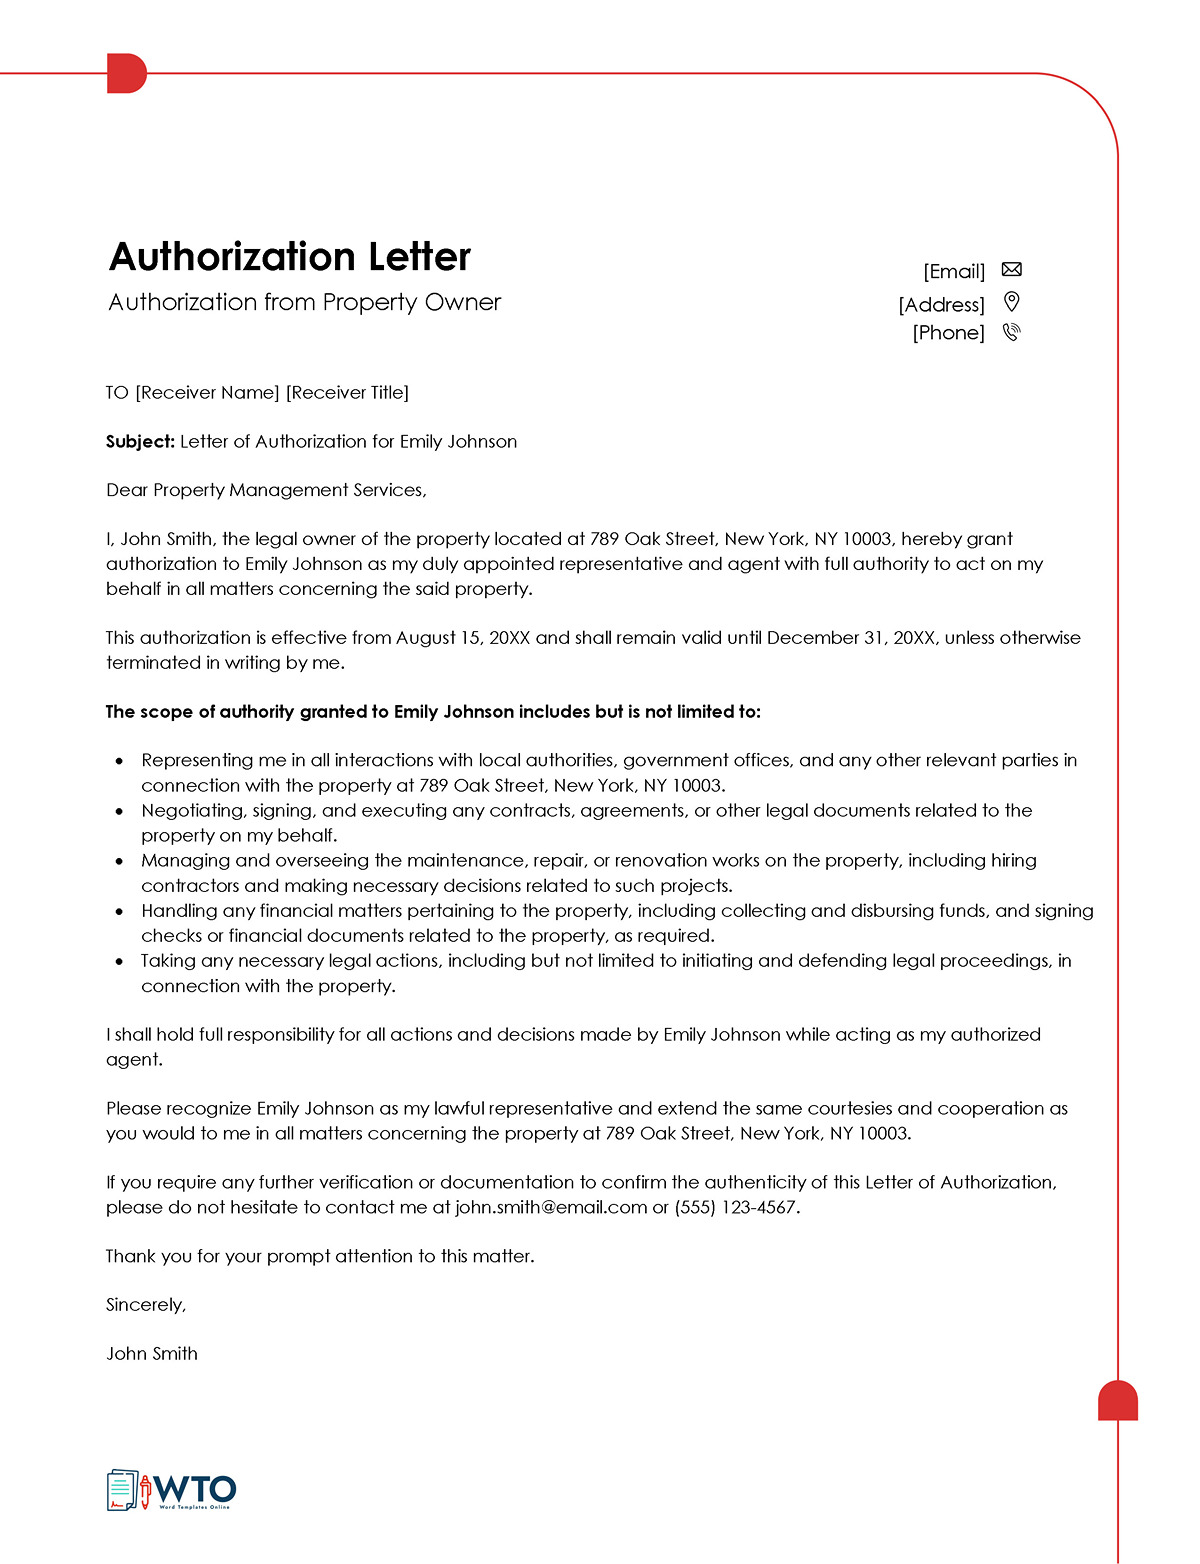 Sample Letter of Authorization from Property Owner-Free Downloadable